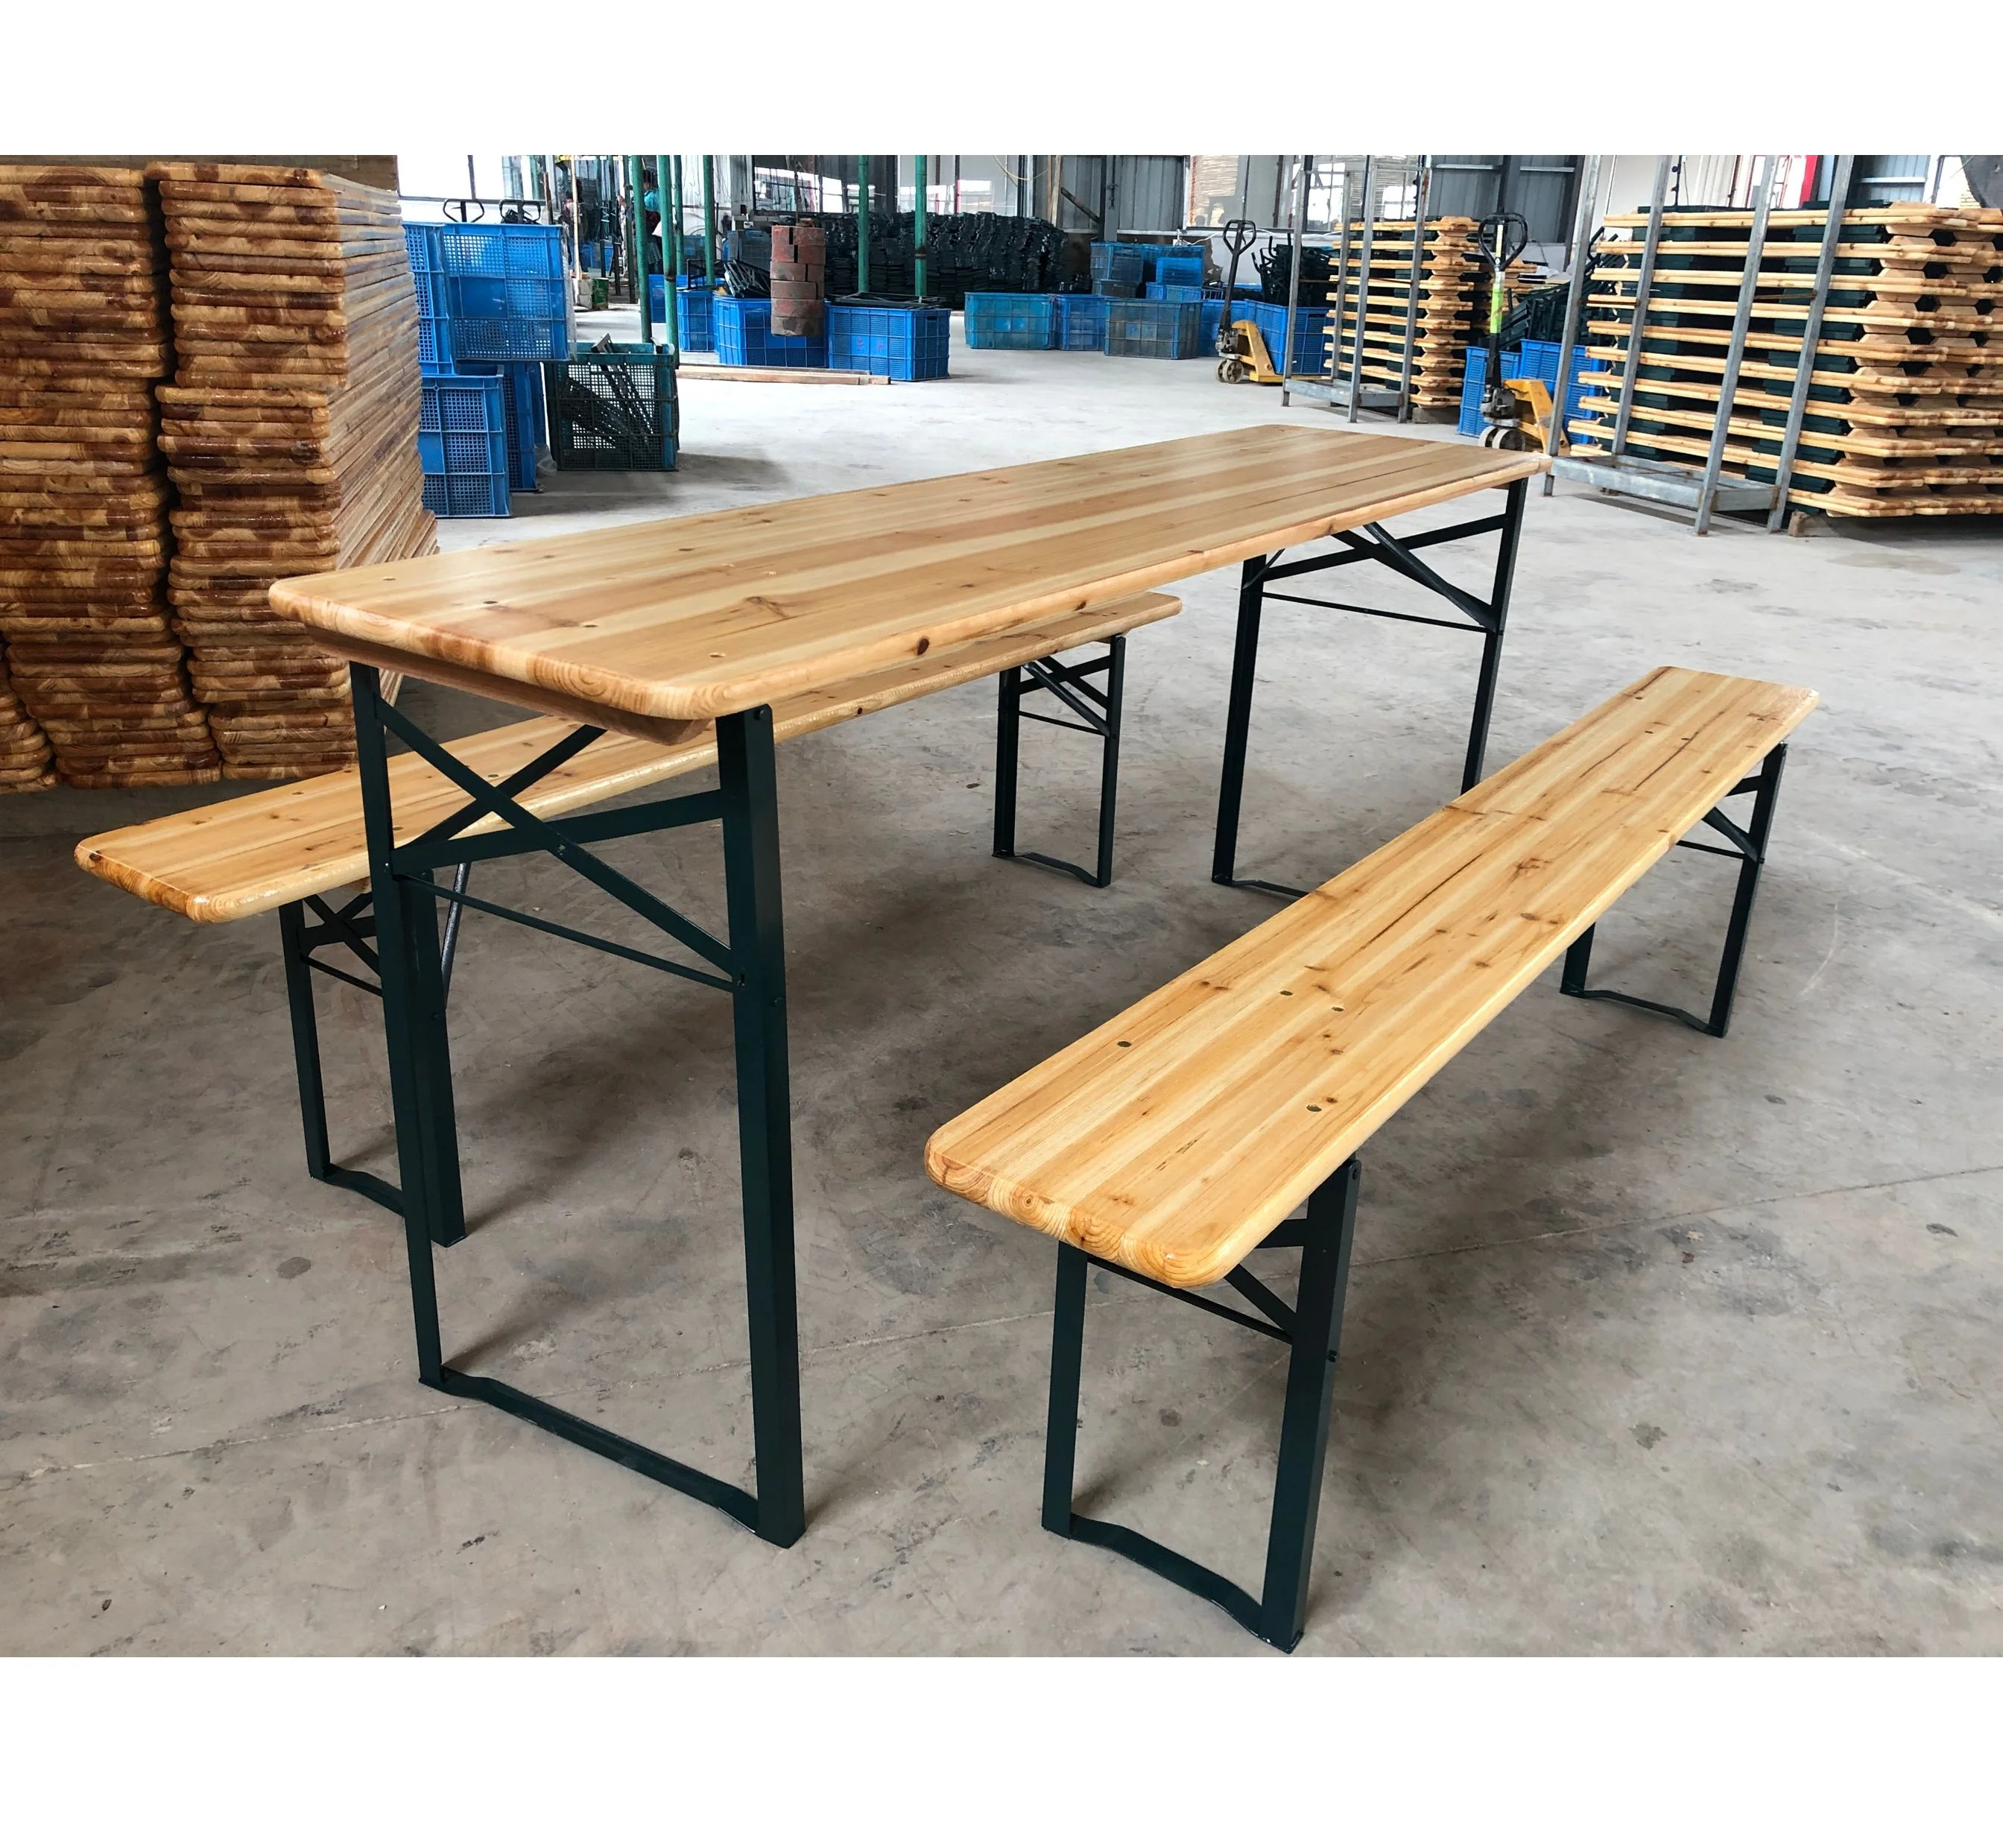 Large Outdoor Wooden Folding Beer Table Bench Set 